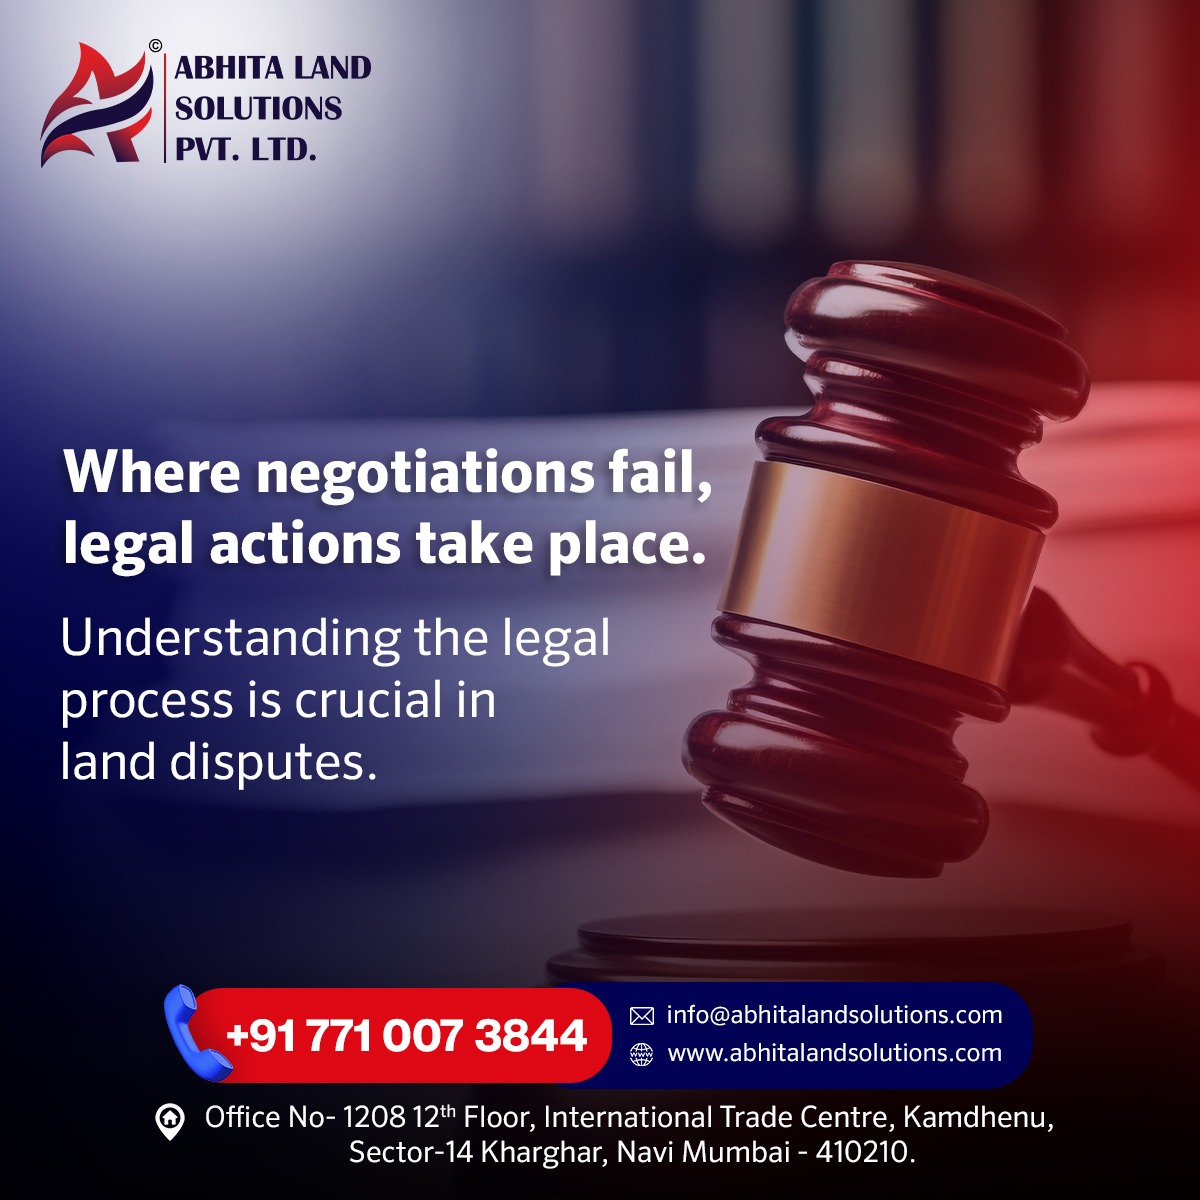 Where negotiations fail, legal actions take place. Understanding the legal process is crucial in resolving #landdisputes.
#LandMatters #PropertyRights #LandRights #LegalAdvice #LegalServices #LegalSolutions #landsolution #landservice #LegalExperts #abhitalandsolutions #navimumbai